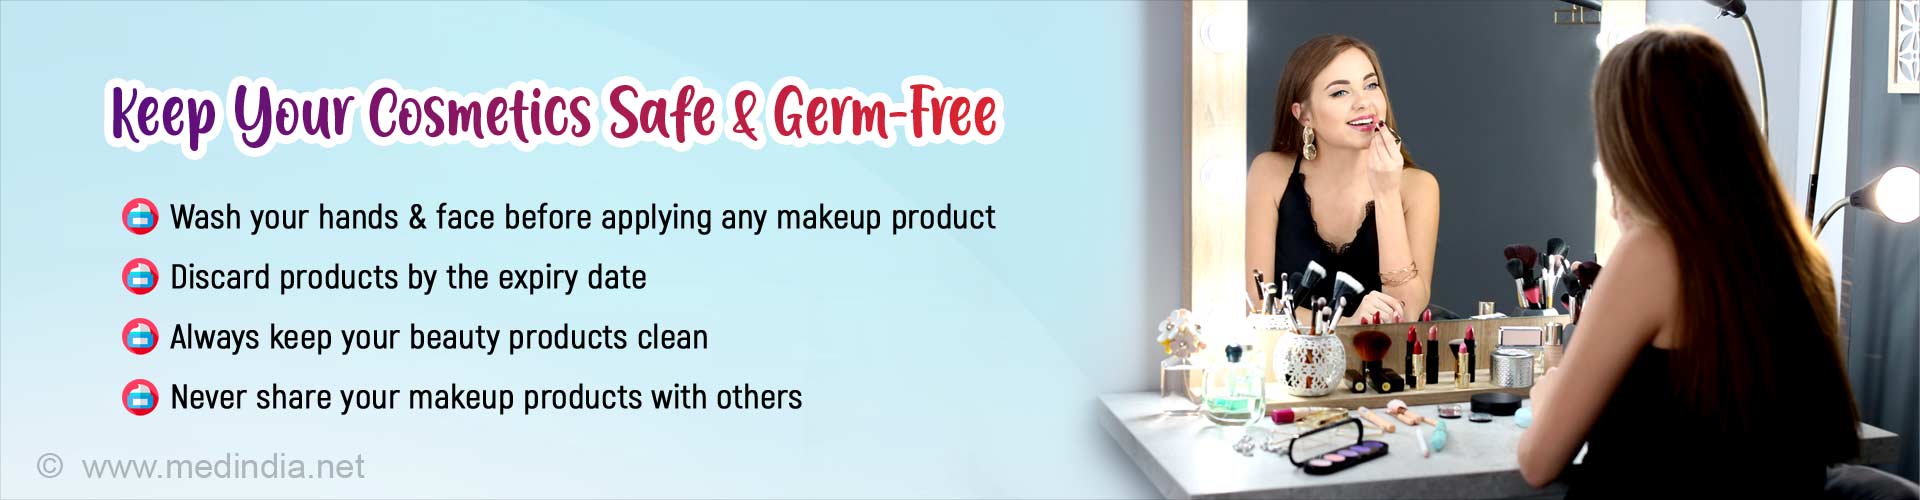 Keep your cosmetics safe and germ-free. Wash your hands and face before applying any makeup product. Discard products by the expiry date. Always keep your beauty products clean. Never share your makeup products with others.